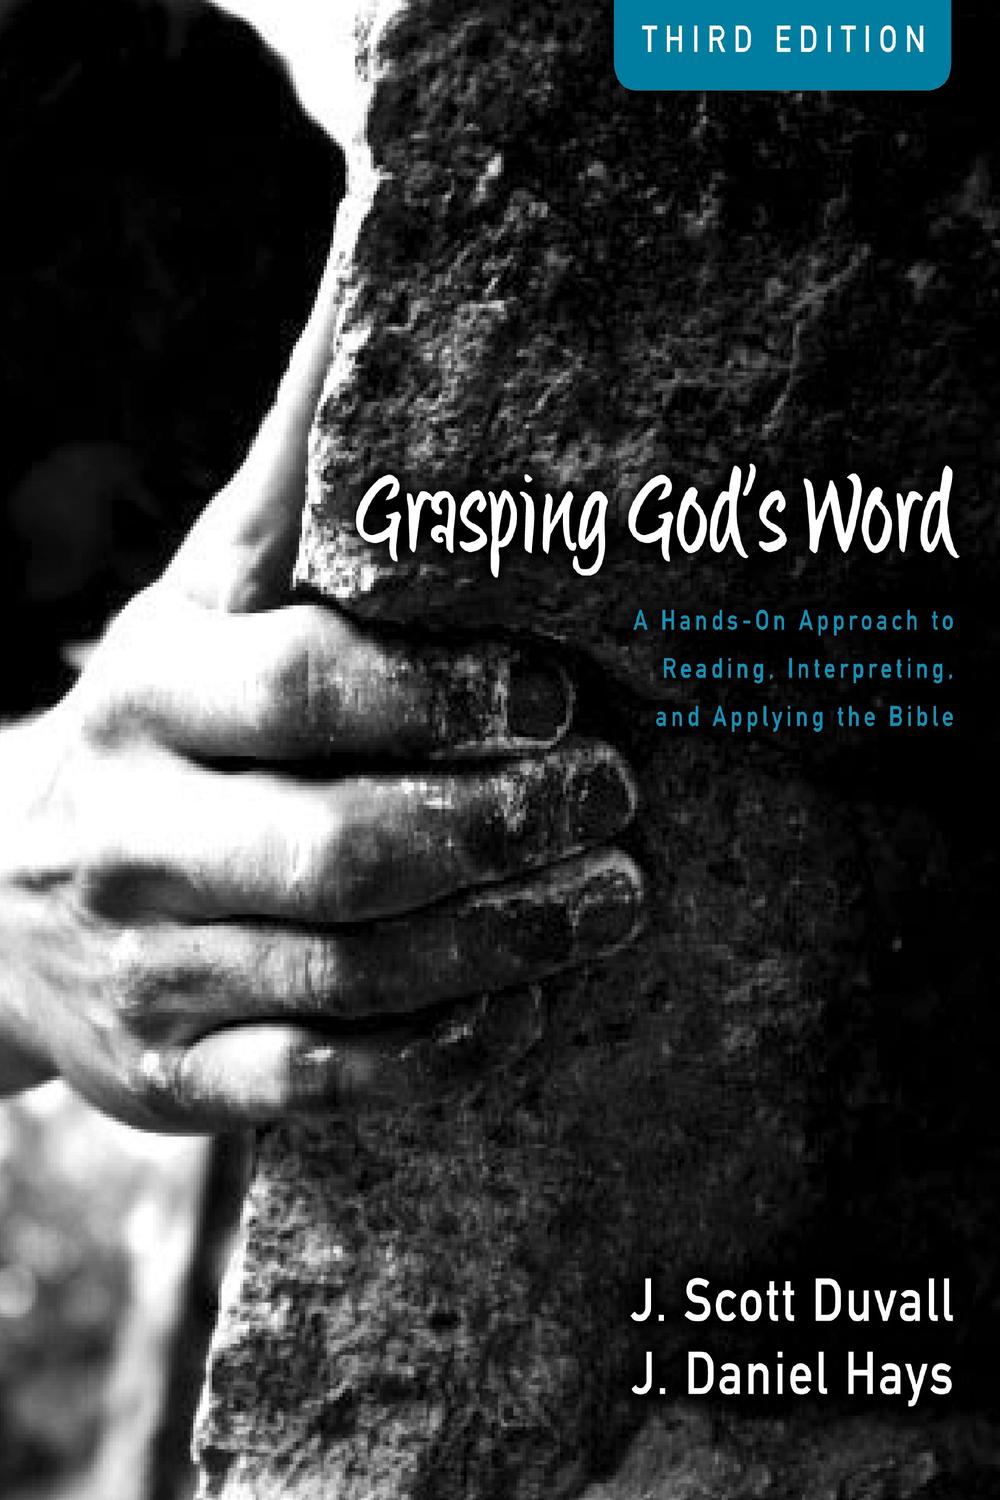 grasping god's word assignment 9 1